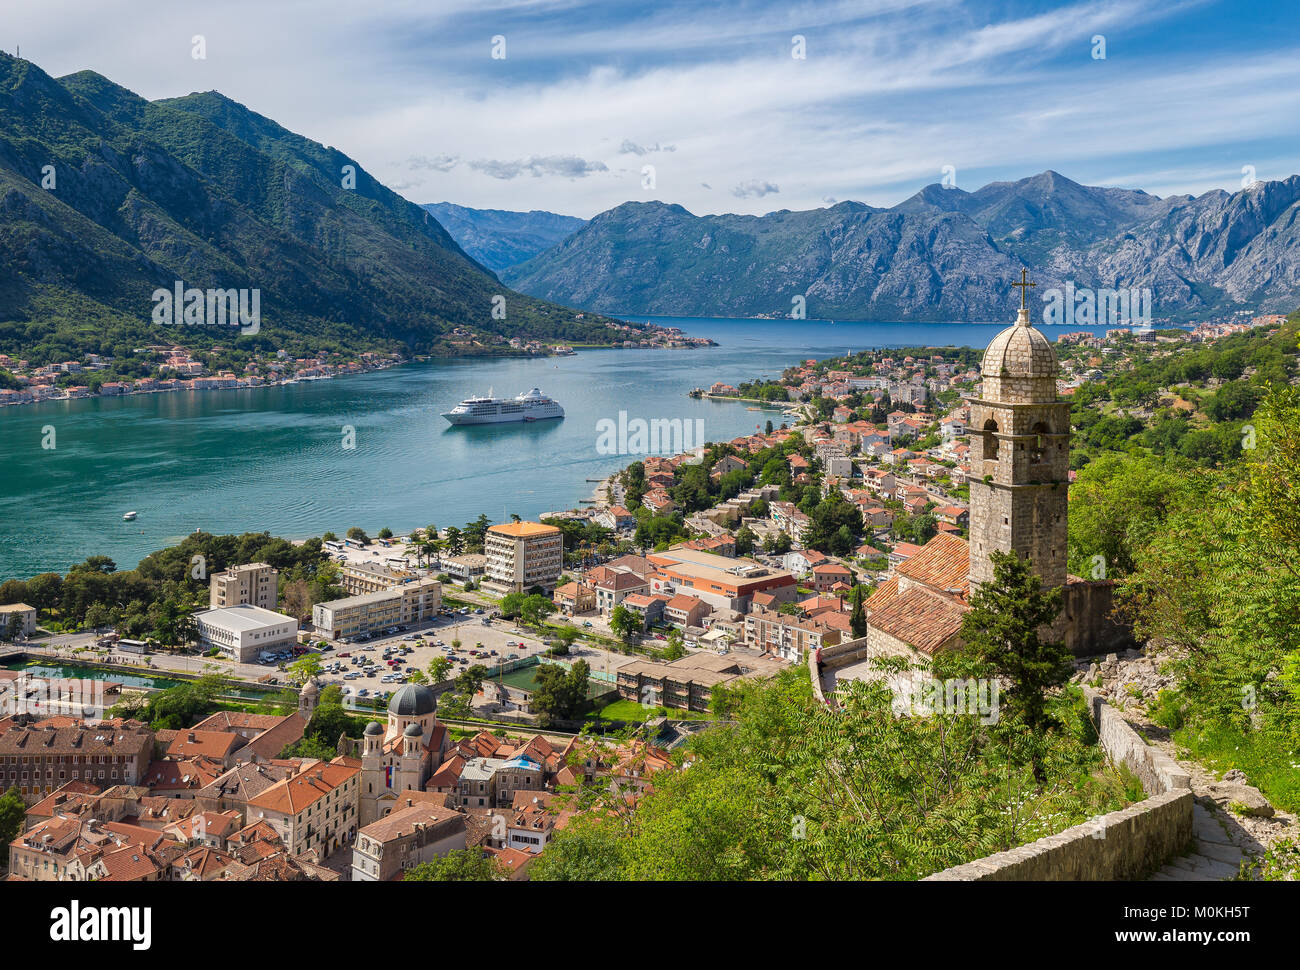 Classic panorama view of the historic Church of Our Lady of Remedy overlooking the old town of Kotor and world-famous Bay of Kotor, Montenegro Stock Photo